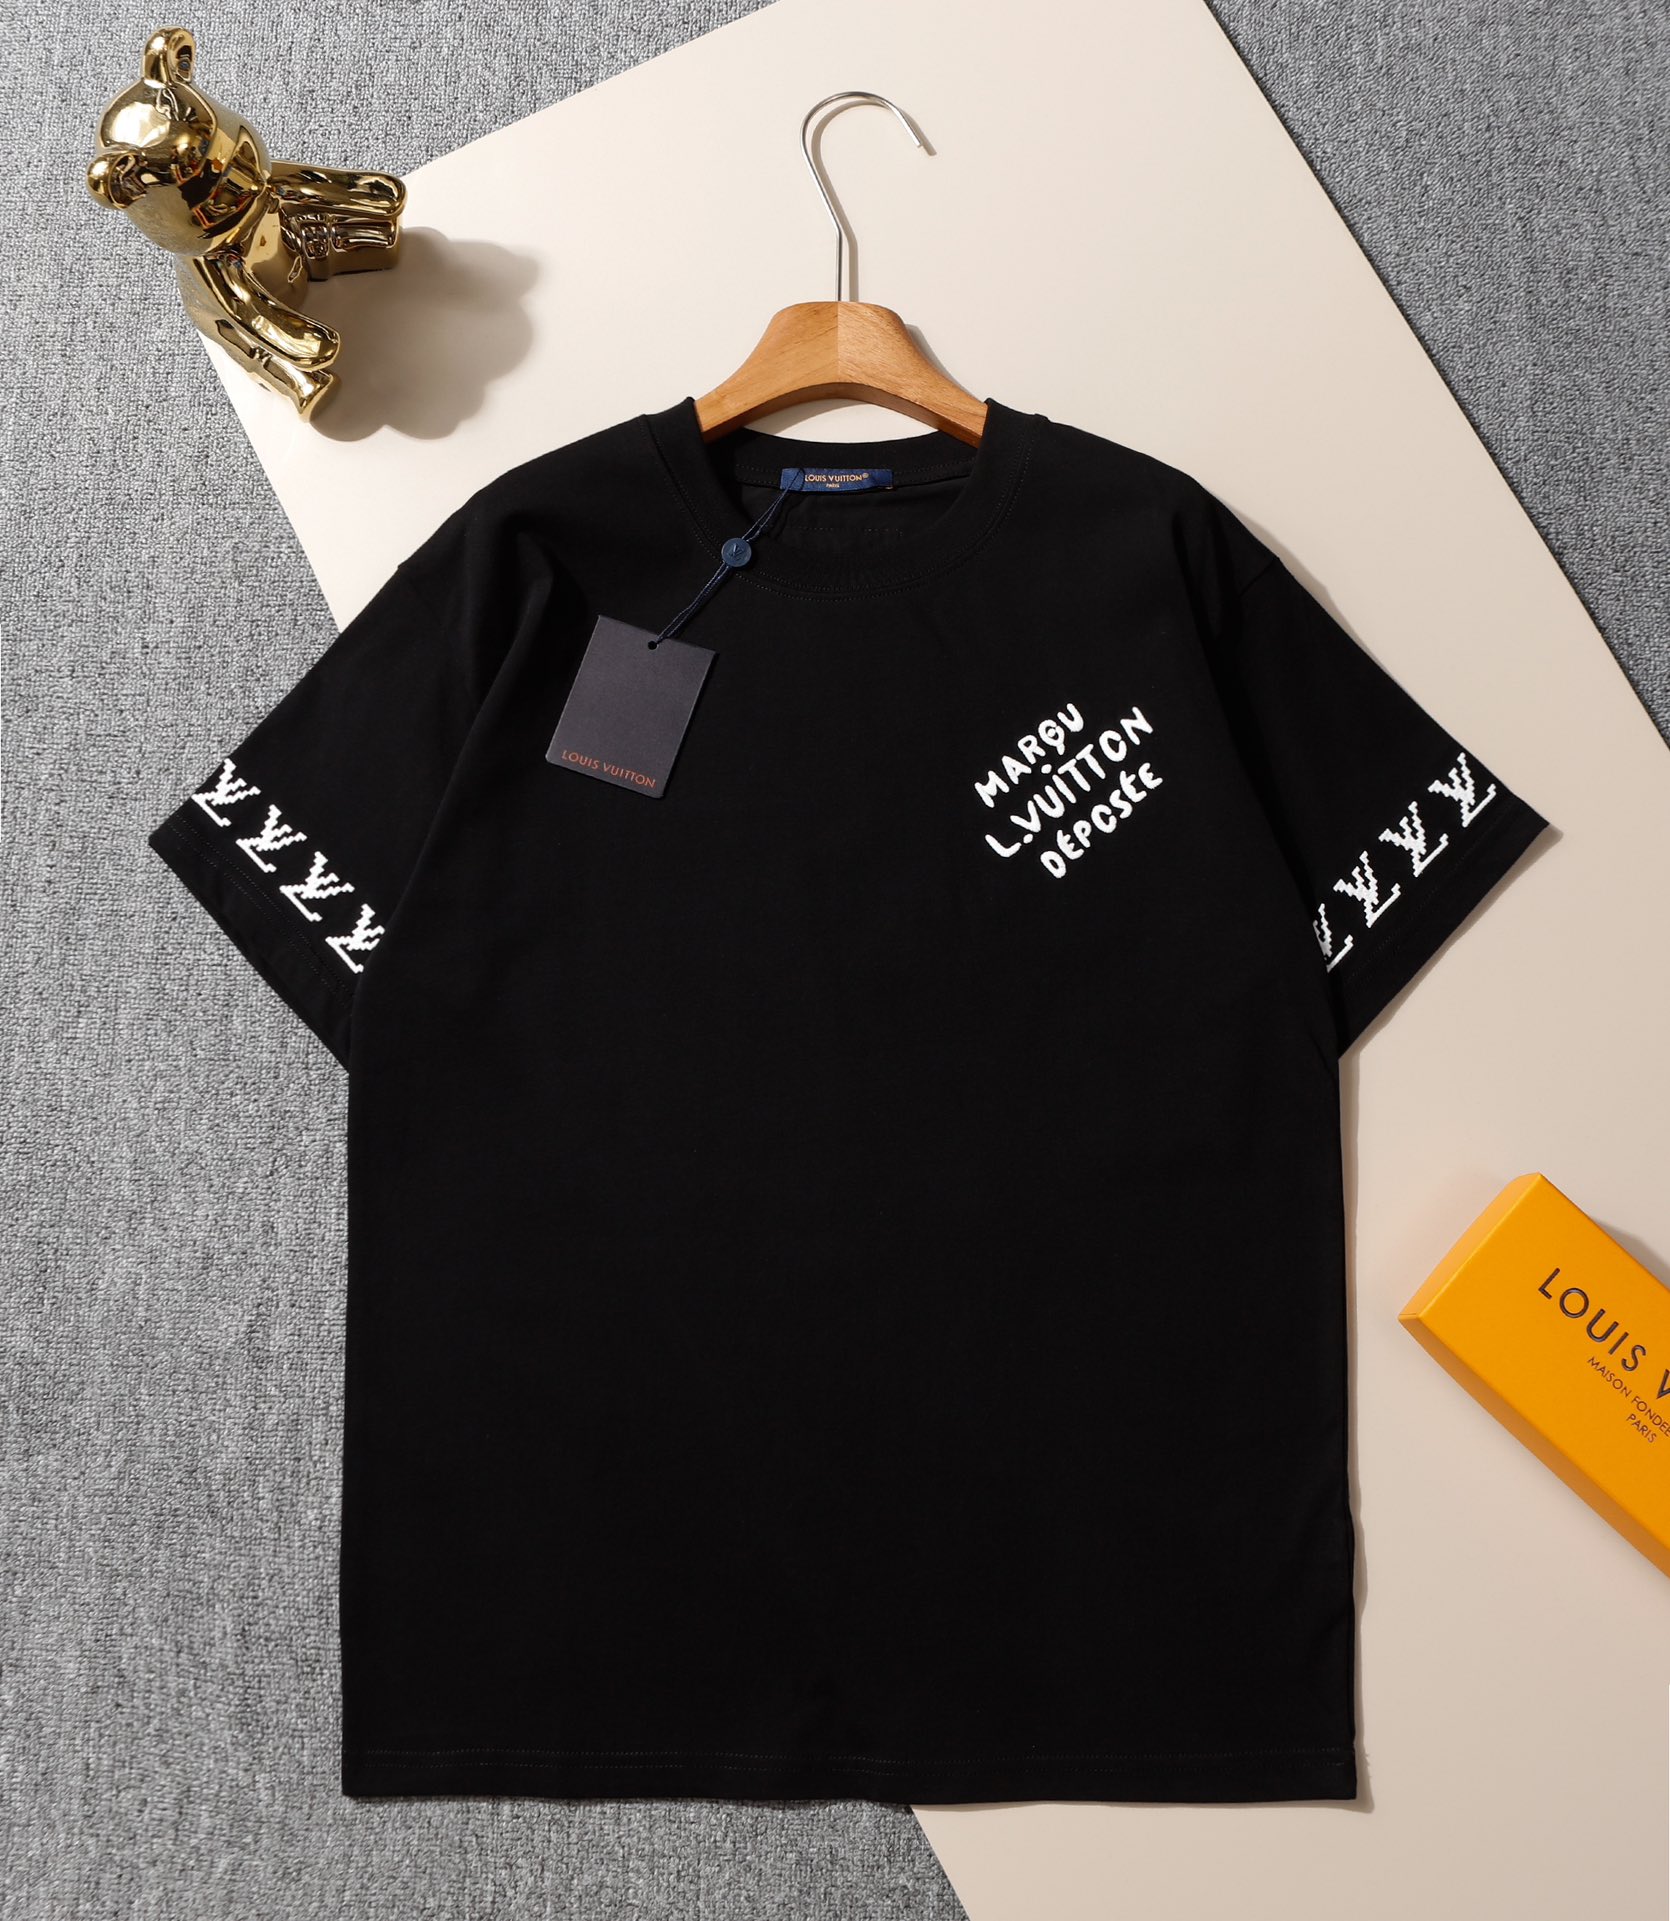 Louis Vuitton Clothing T-Shirt Cotton Spring/Summer Collection Short Sleeve